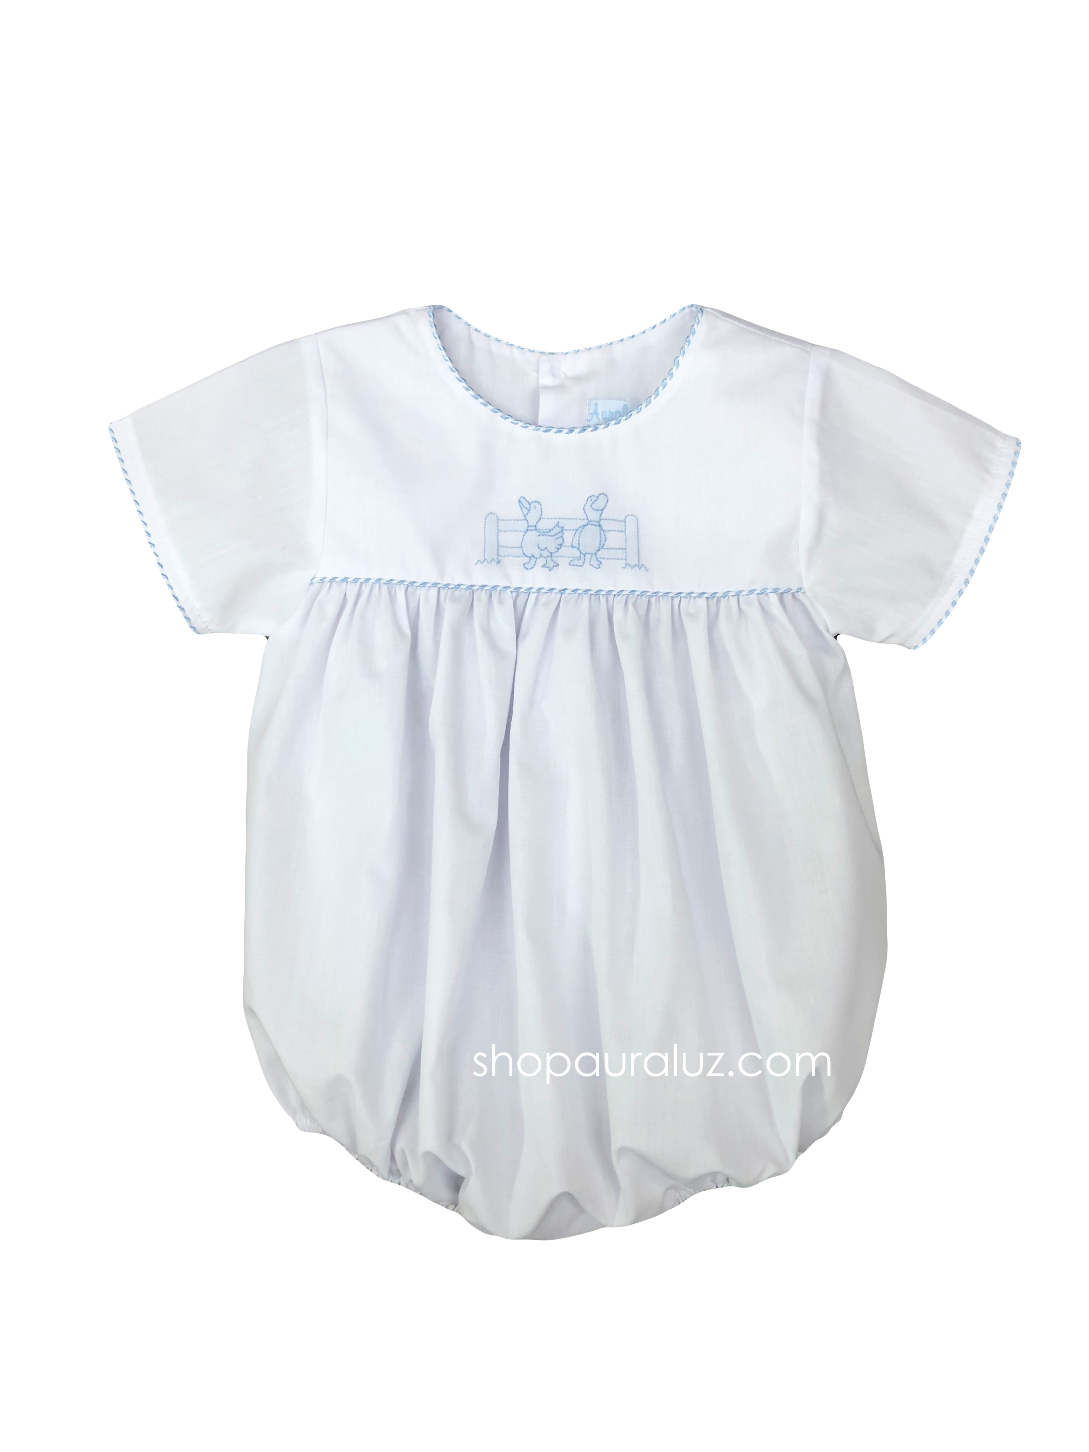 Auraluz Boy Bubble..White with blue shiny cord trim, no collar and embroidered ducks